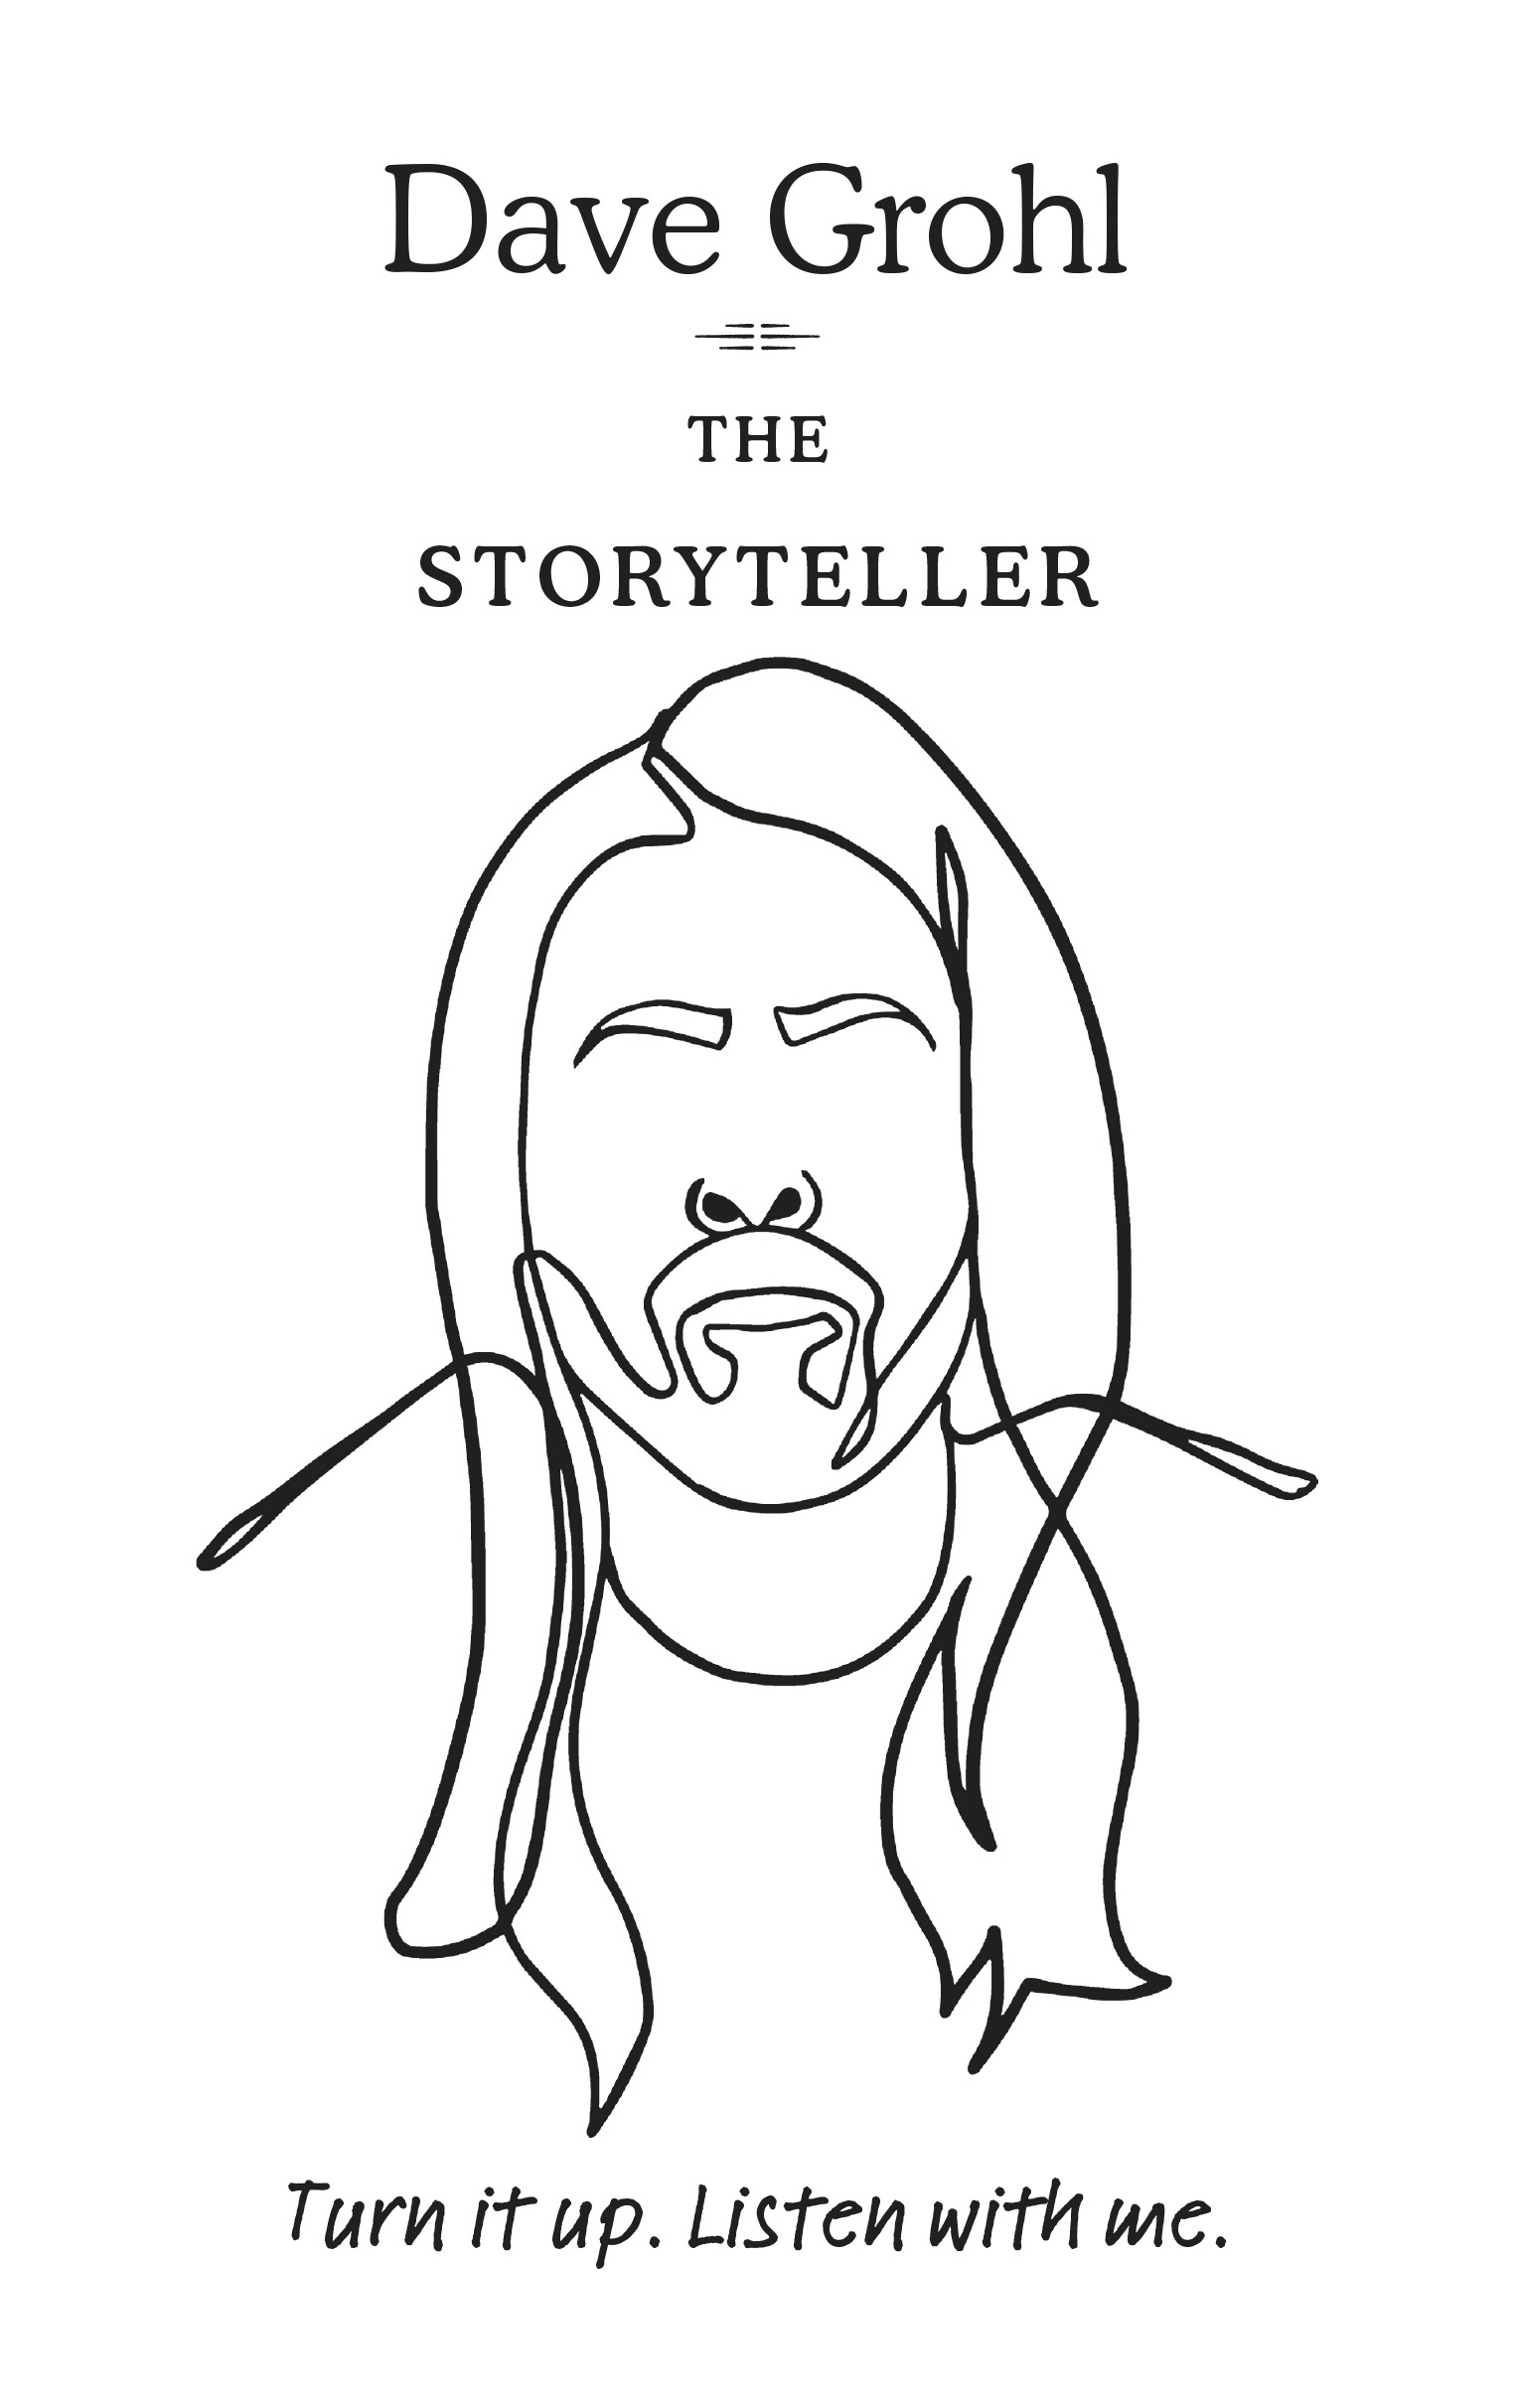 Album artwork for Album artwork for The Storyteller: Tales of Life and Music by Dave Grohl by The Storyteller: Tales of Life and Music - Dave Grohl